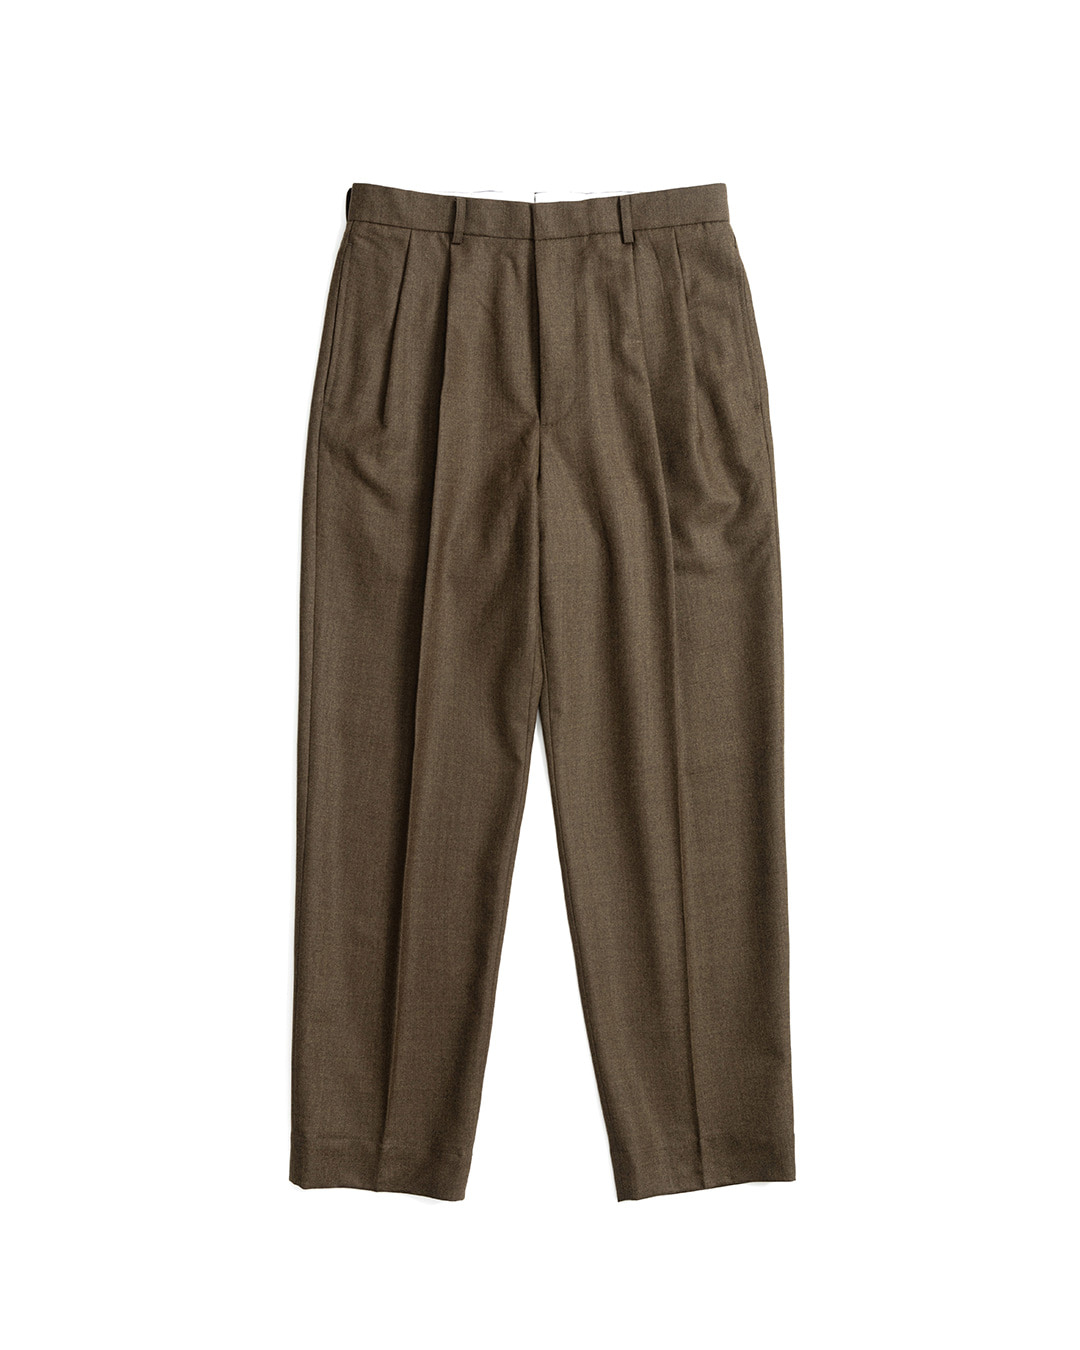 06 DOUBLE PLEATED WOOL TROUSERS (olive green)